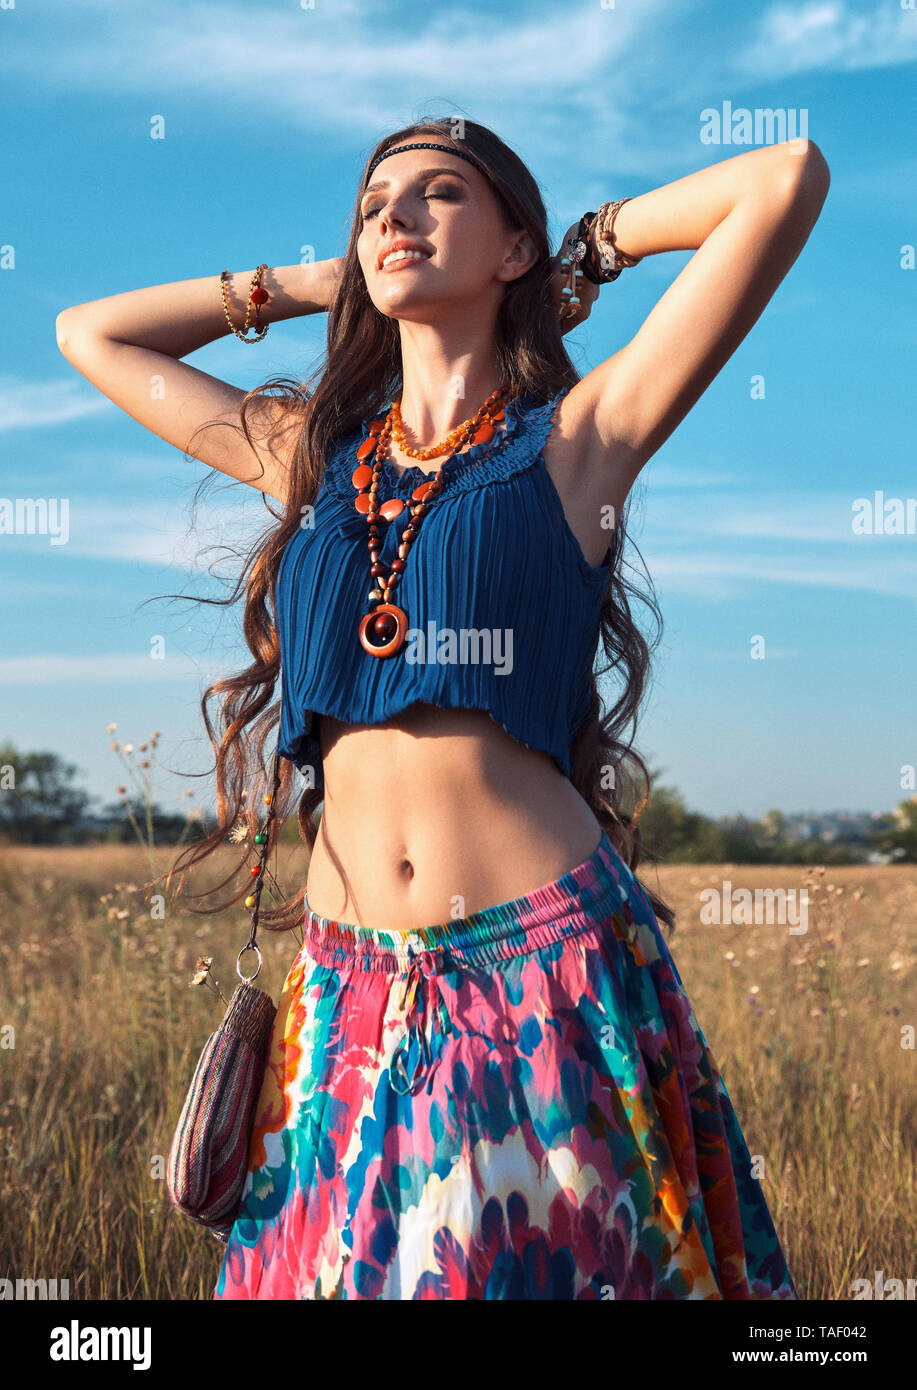 Outdoor portrait of the smiling cute young boho (hippie) girl in